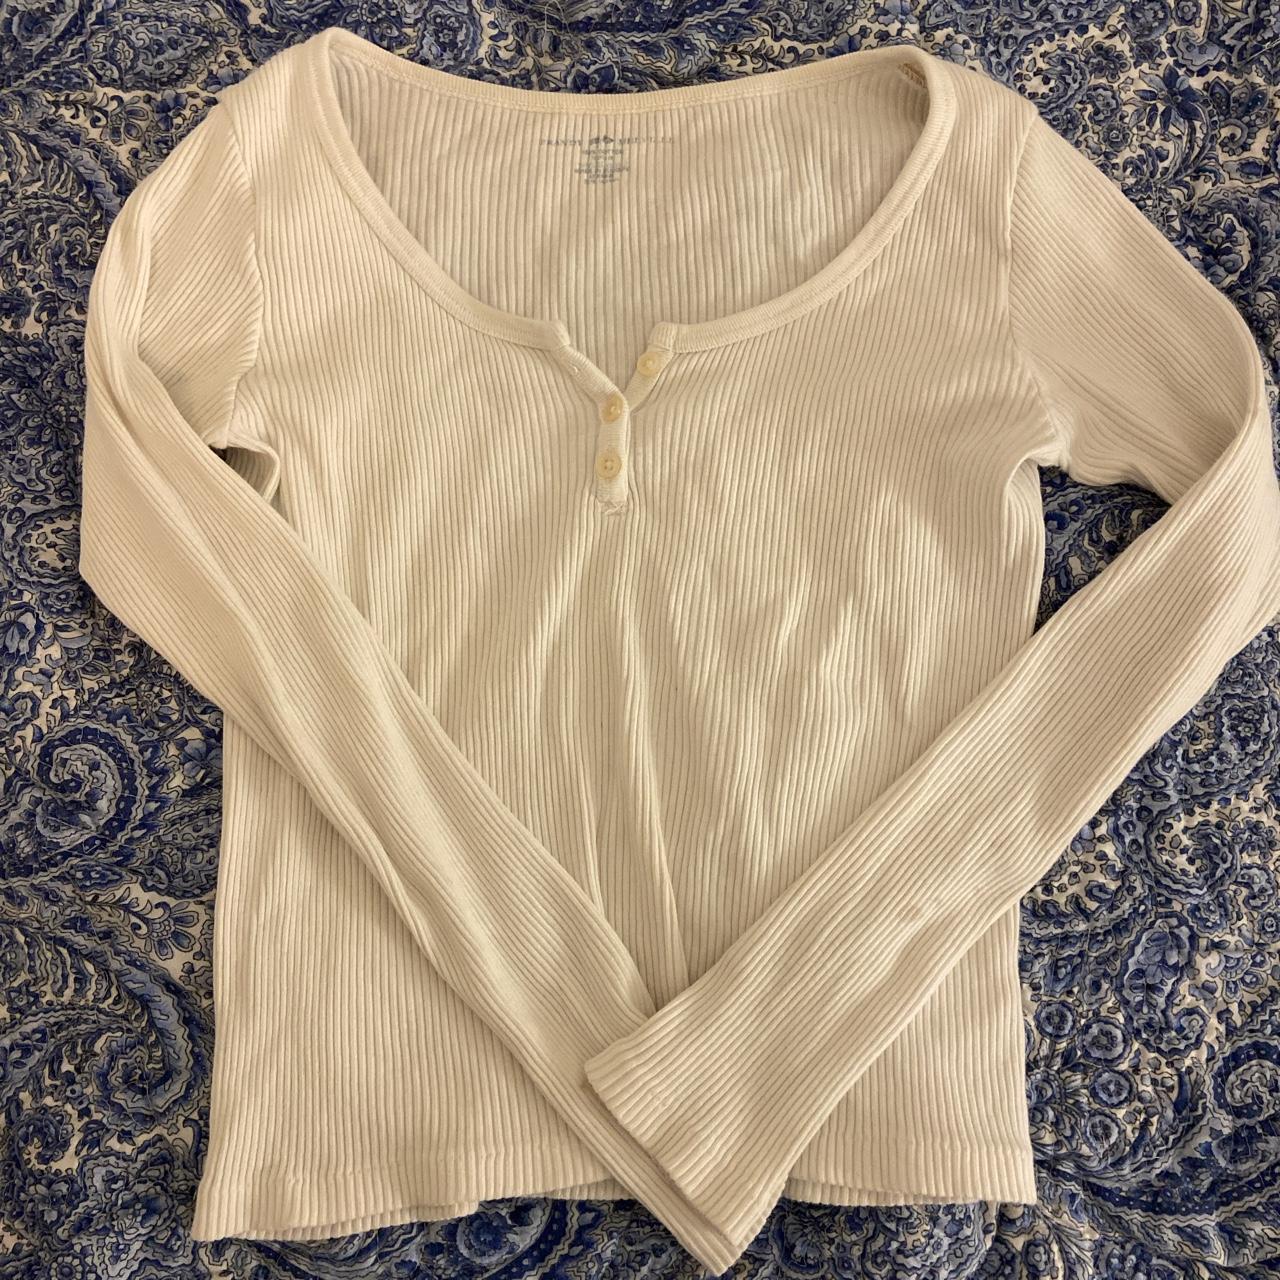 Brandy Melville Solid White Long Sleeve Button-Down Shirt One Size - 44%  off